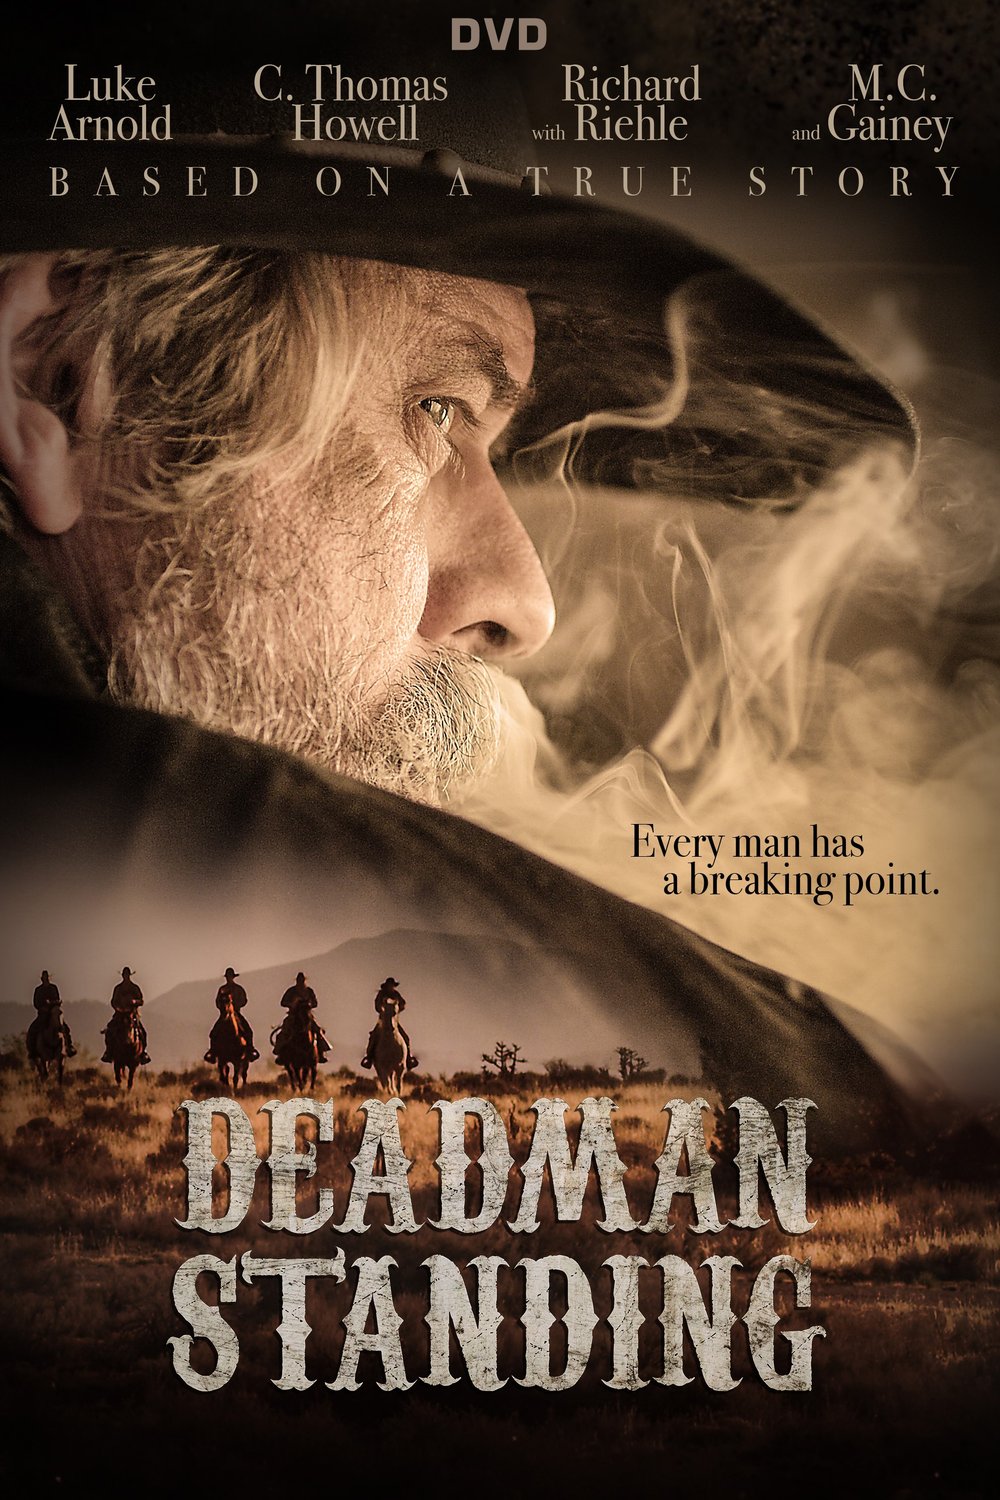 Poster of the movie Deadman Standing